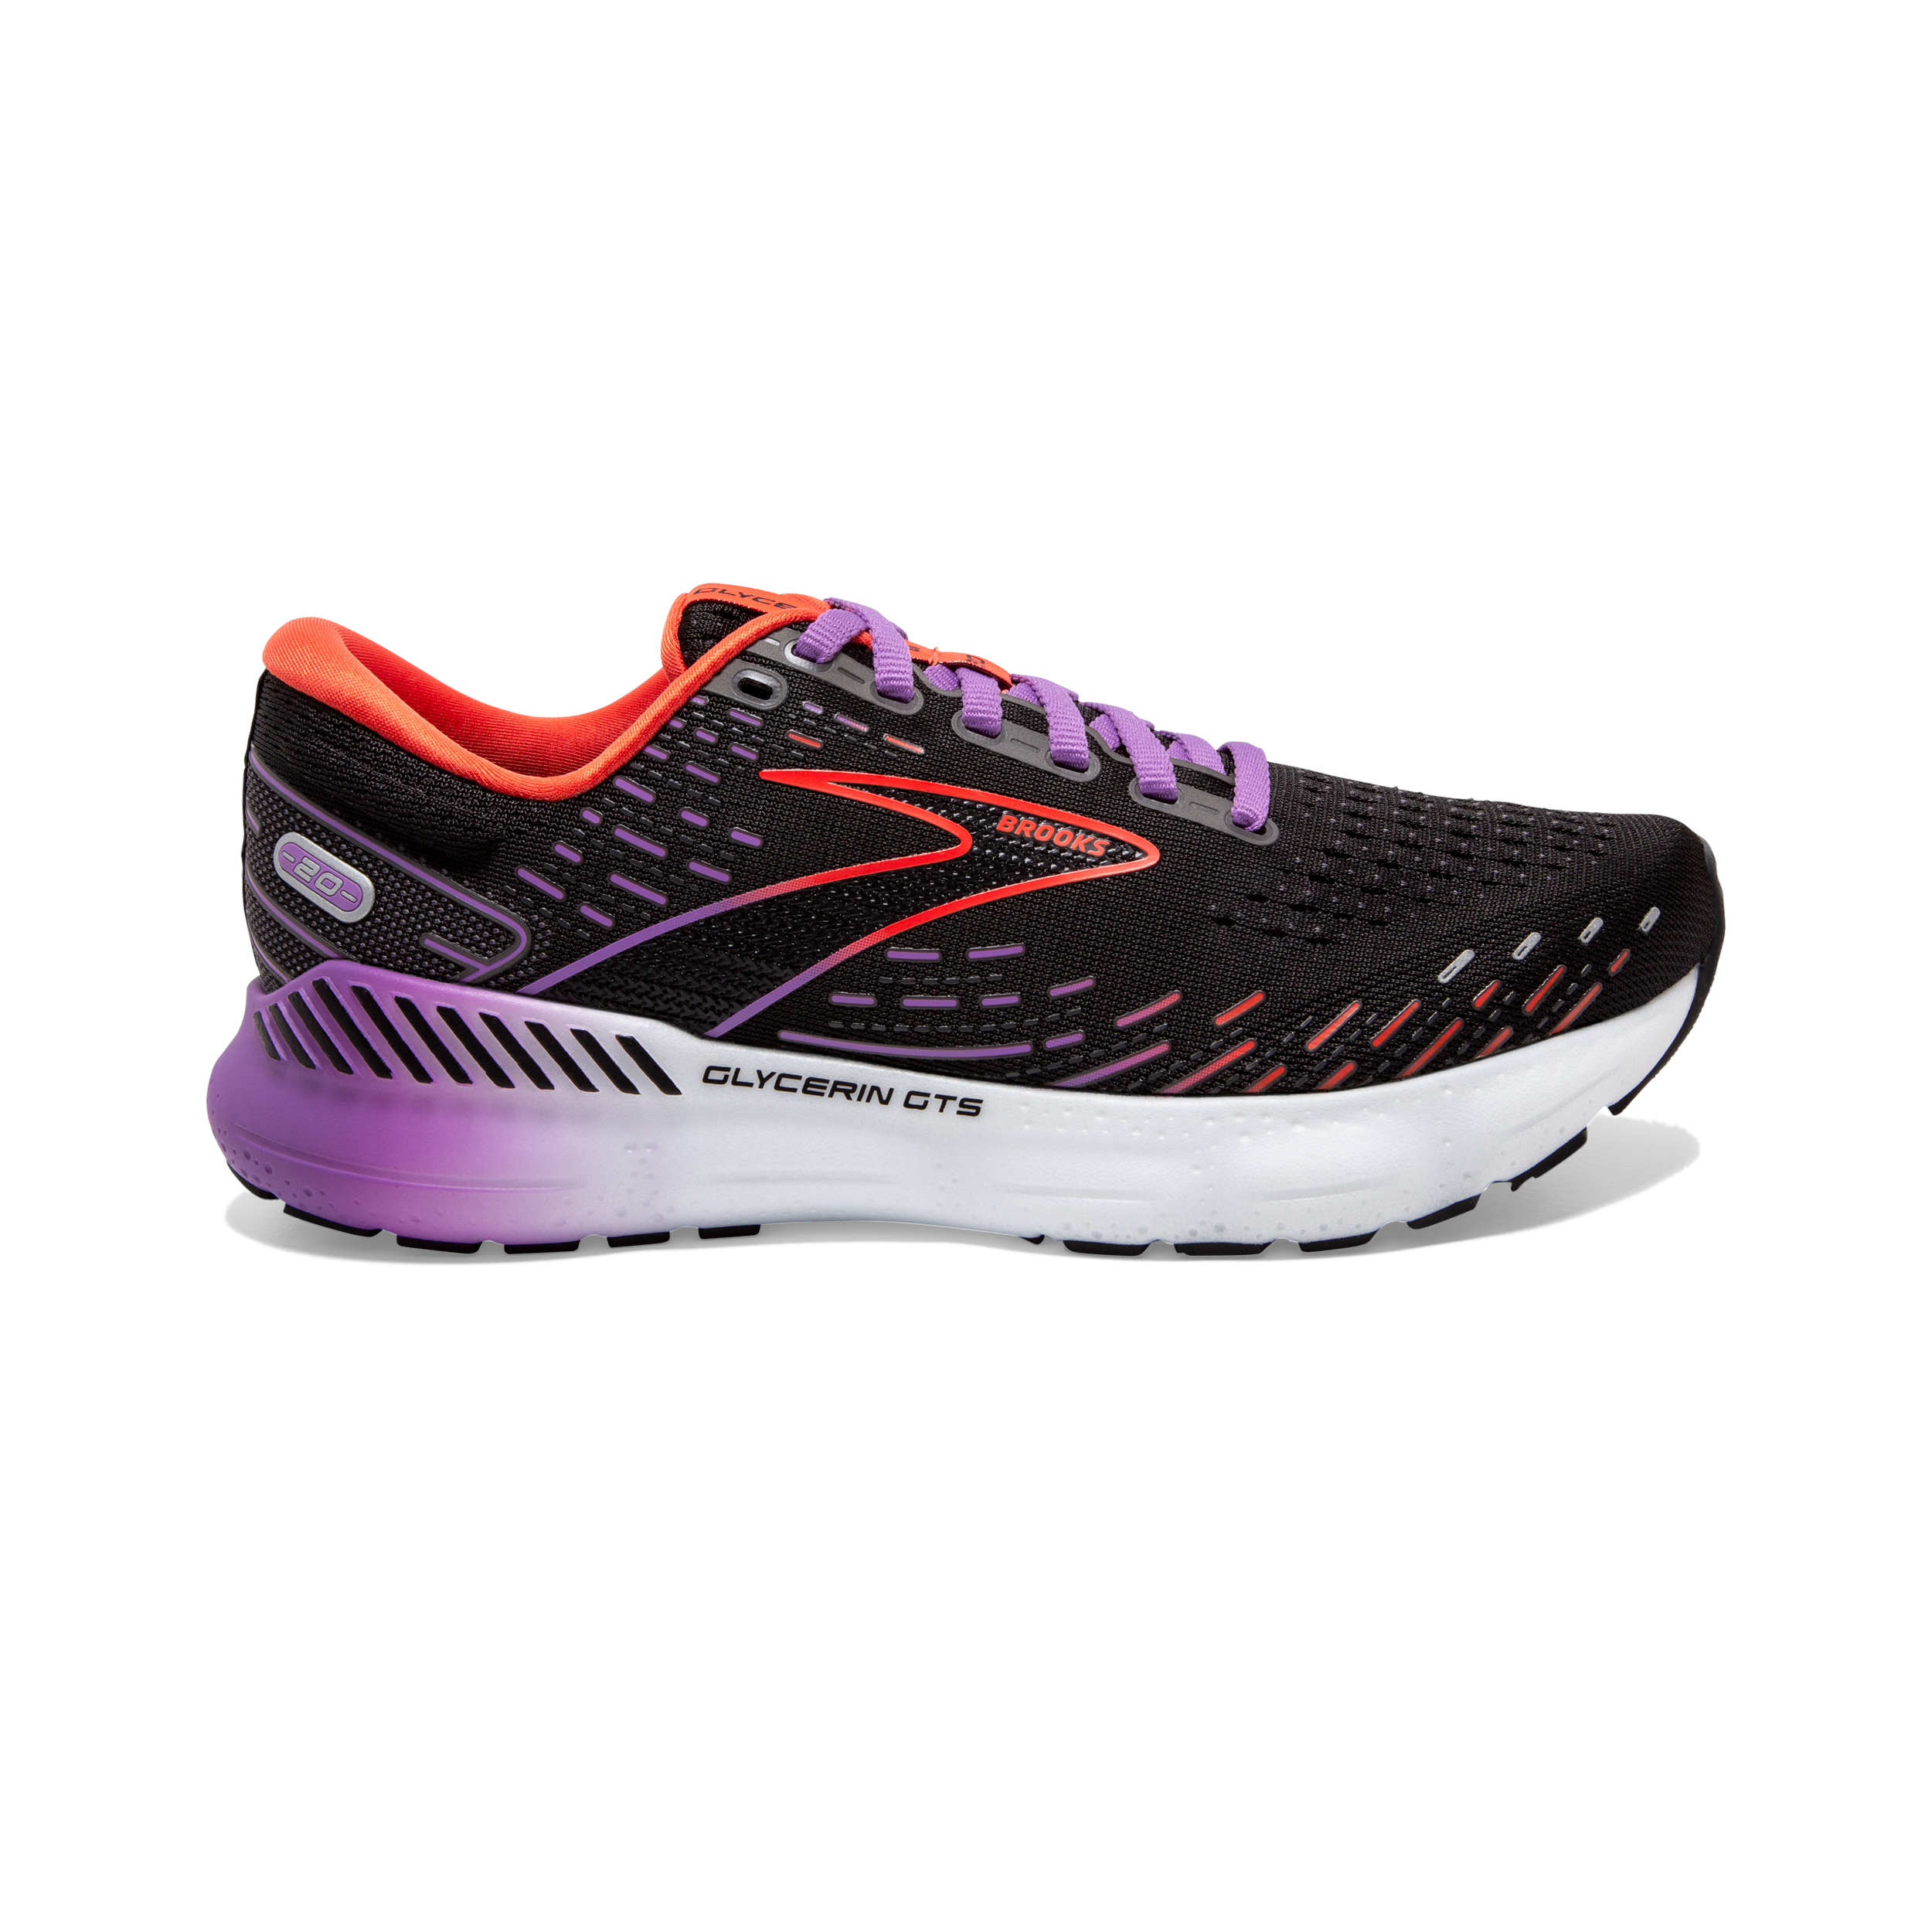 Which Brooks Womens Shoe Has the Most Cushioning?